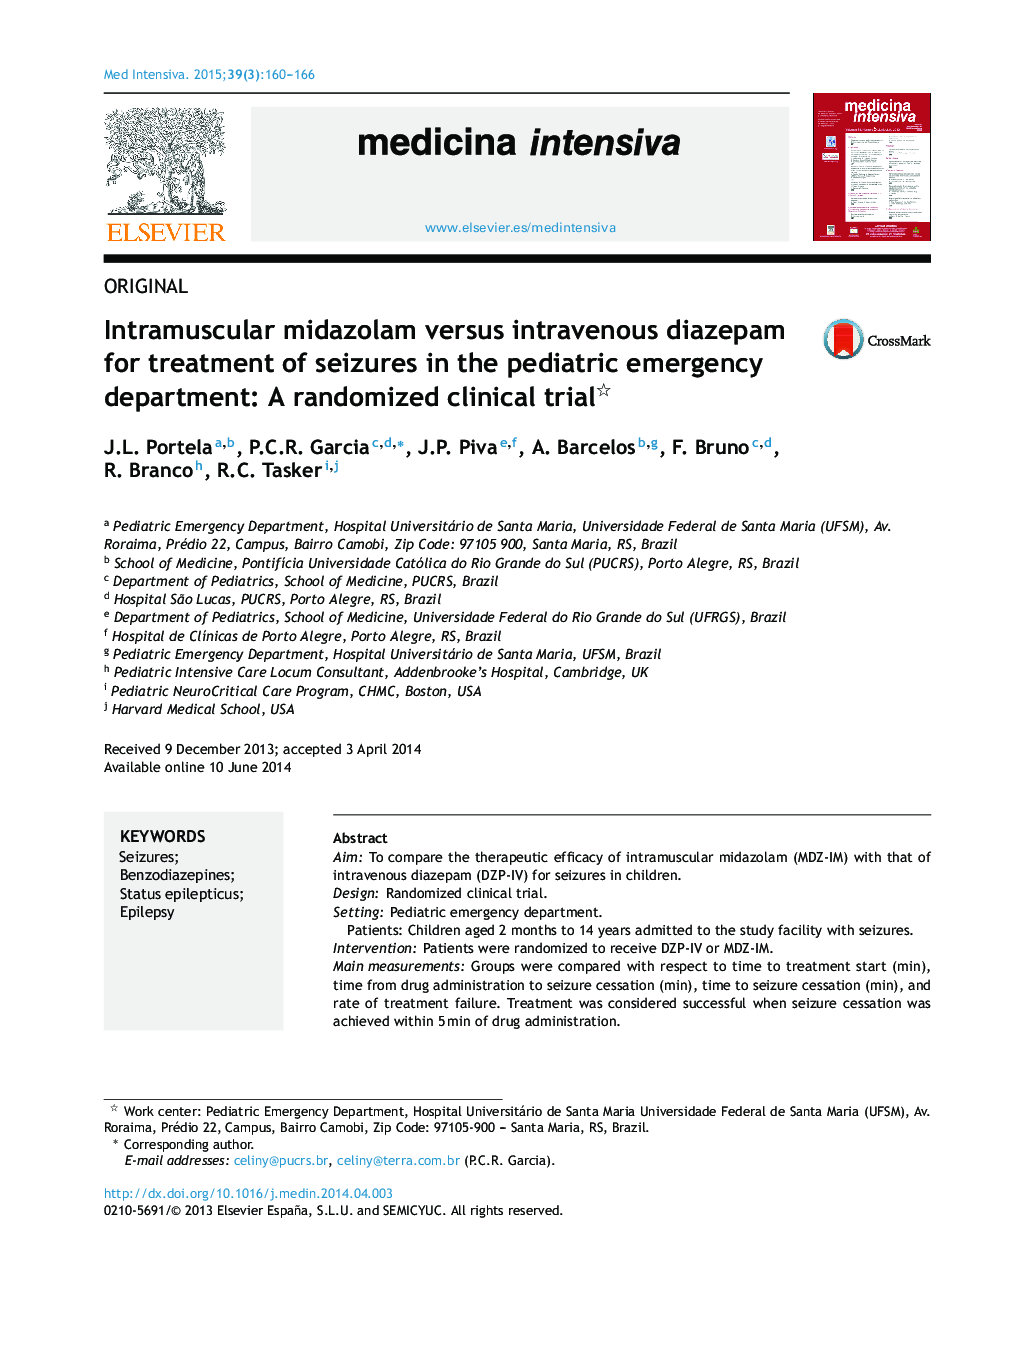 Intramuscular midazolam versus intravenous diazepam for treatment of seizures in the pediatric emergency department: A randomized clinical trial 